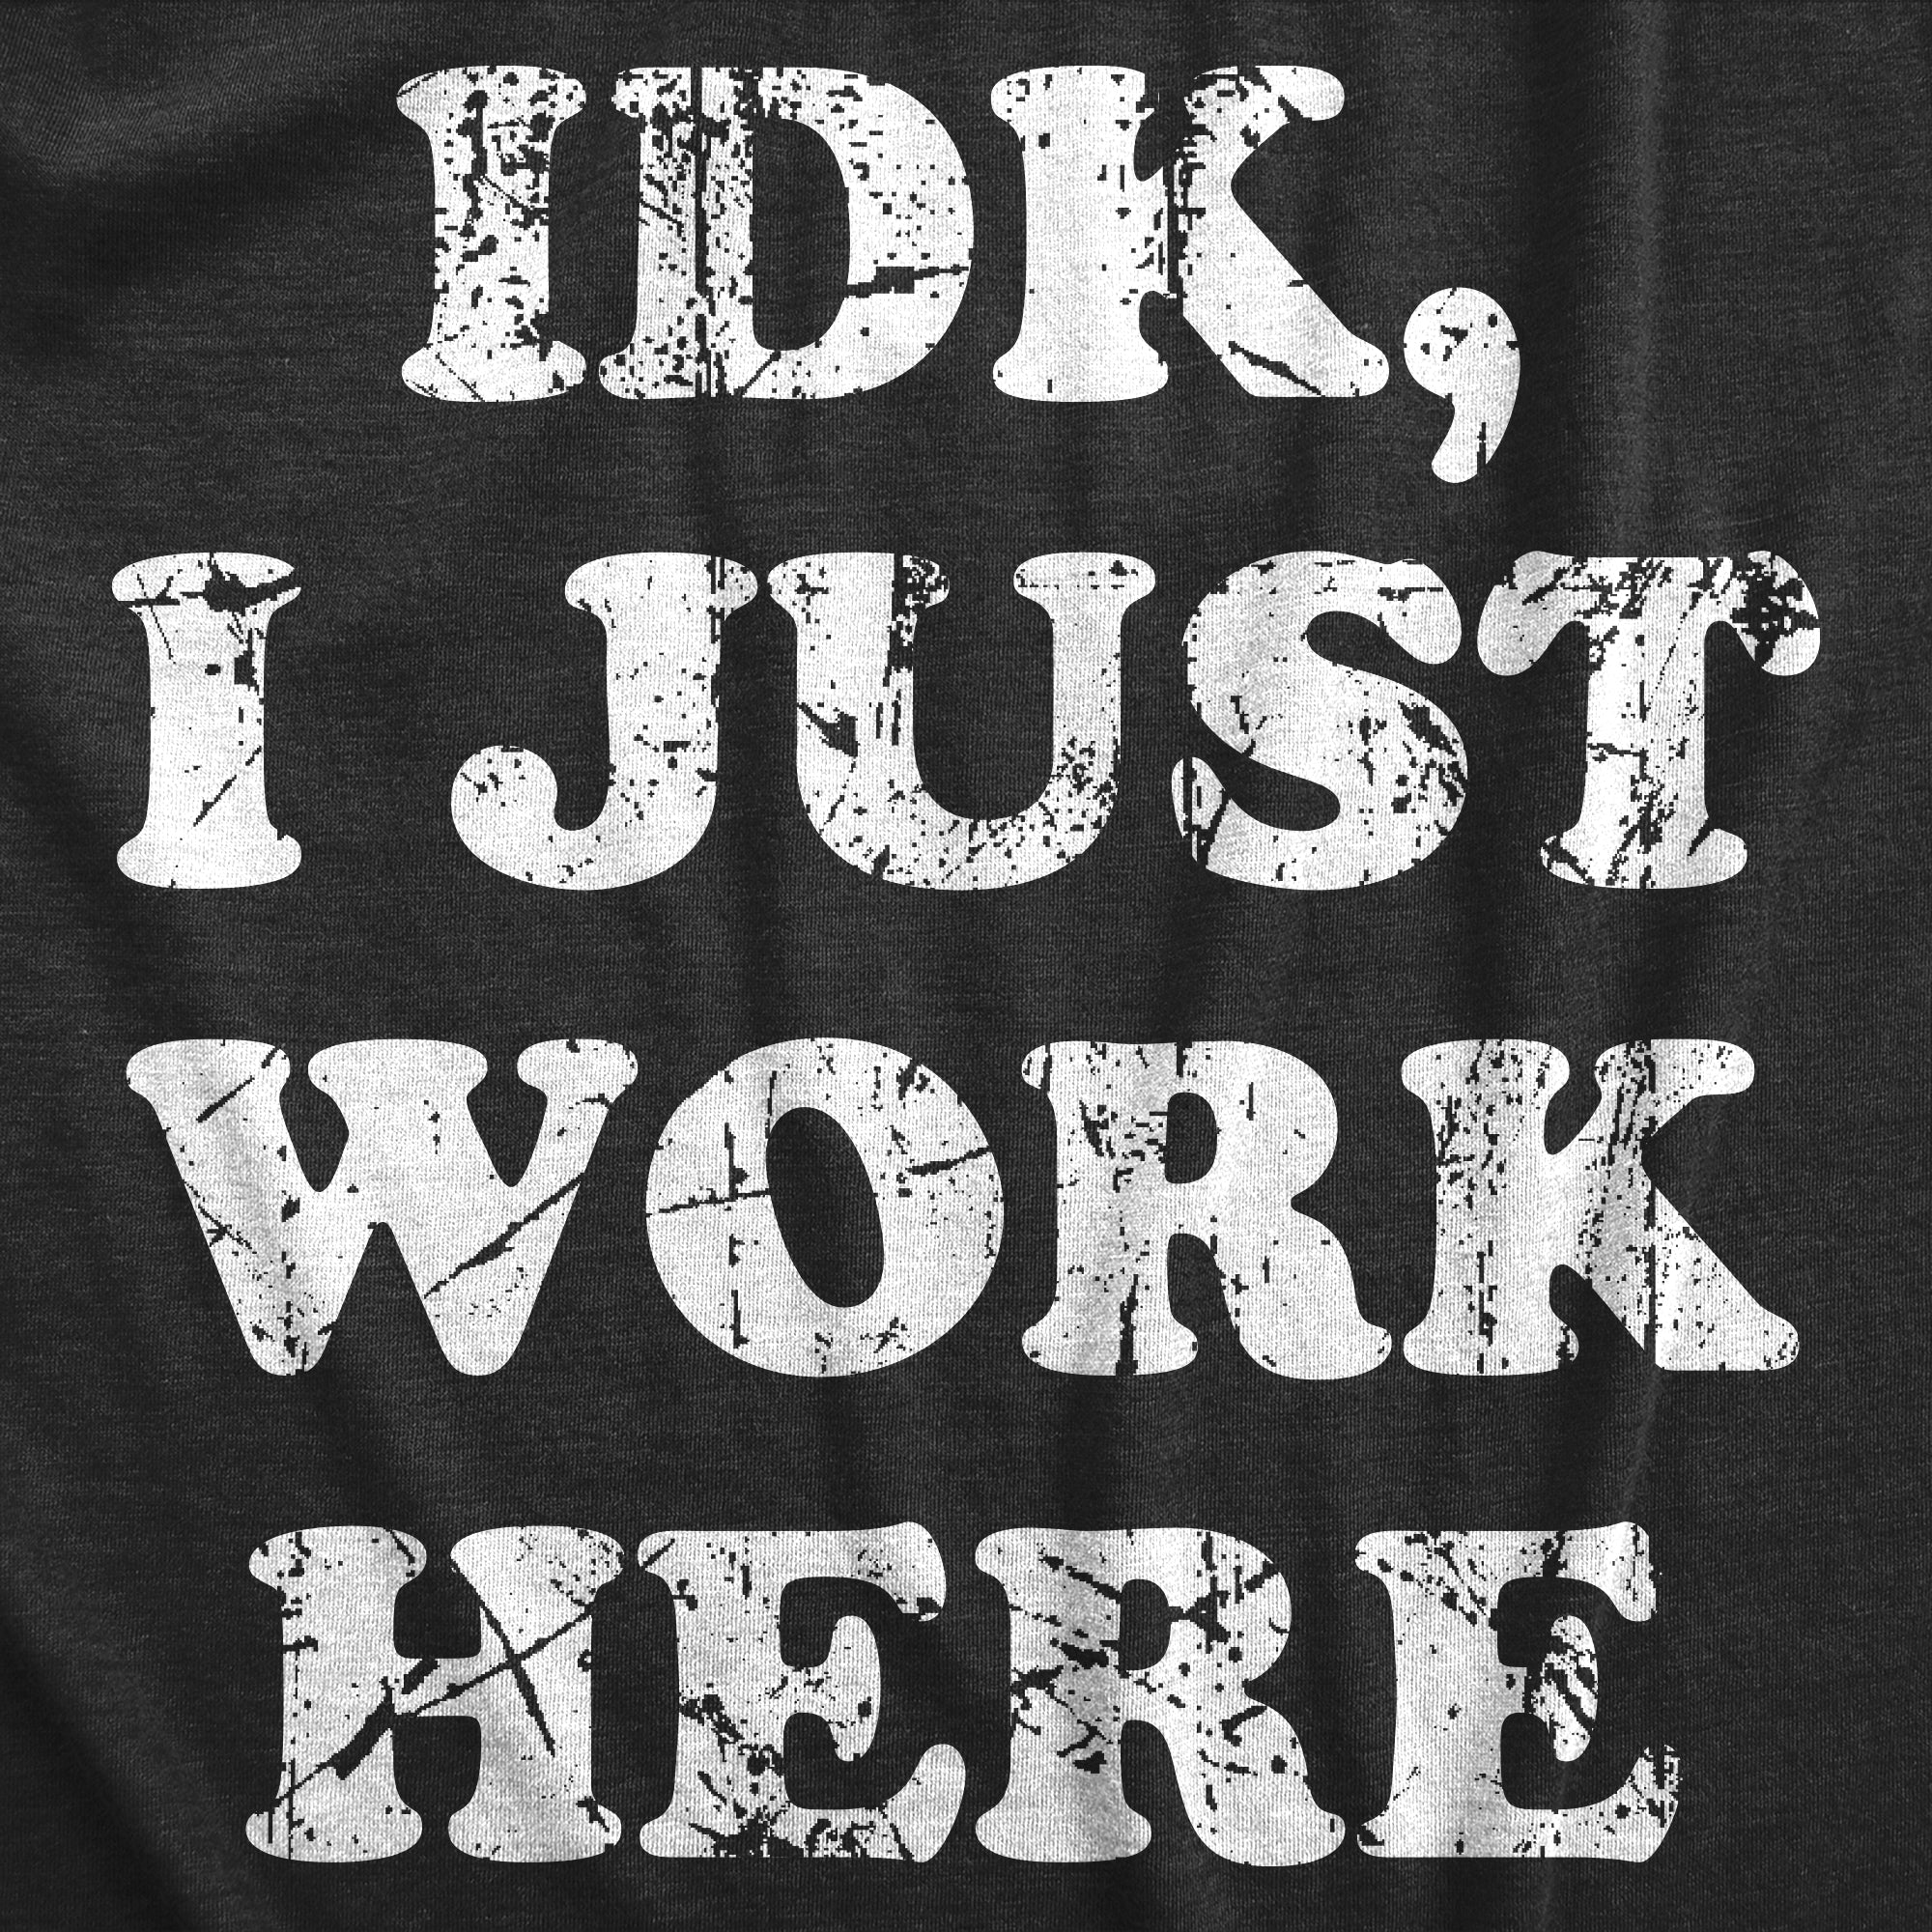 Funny Heather Black - WORK IDK I Just Work Here Mens T Shirt Nerdy Office Sarcastic Tee